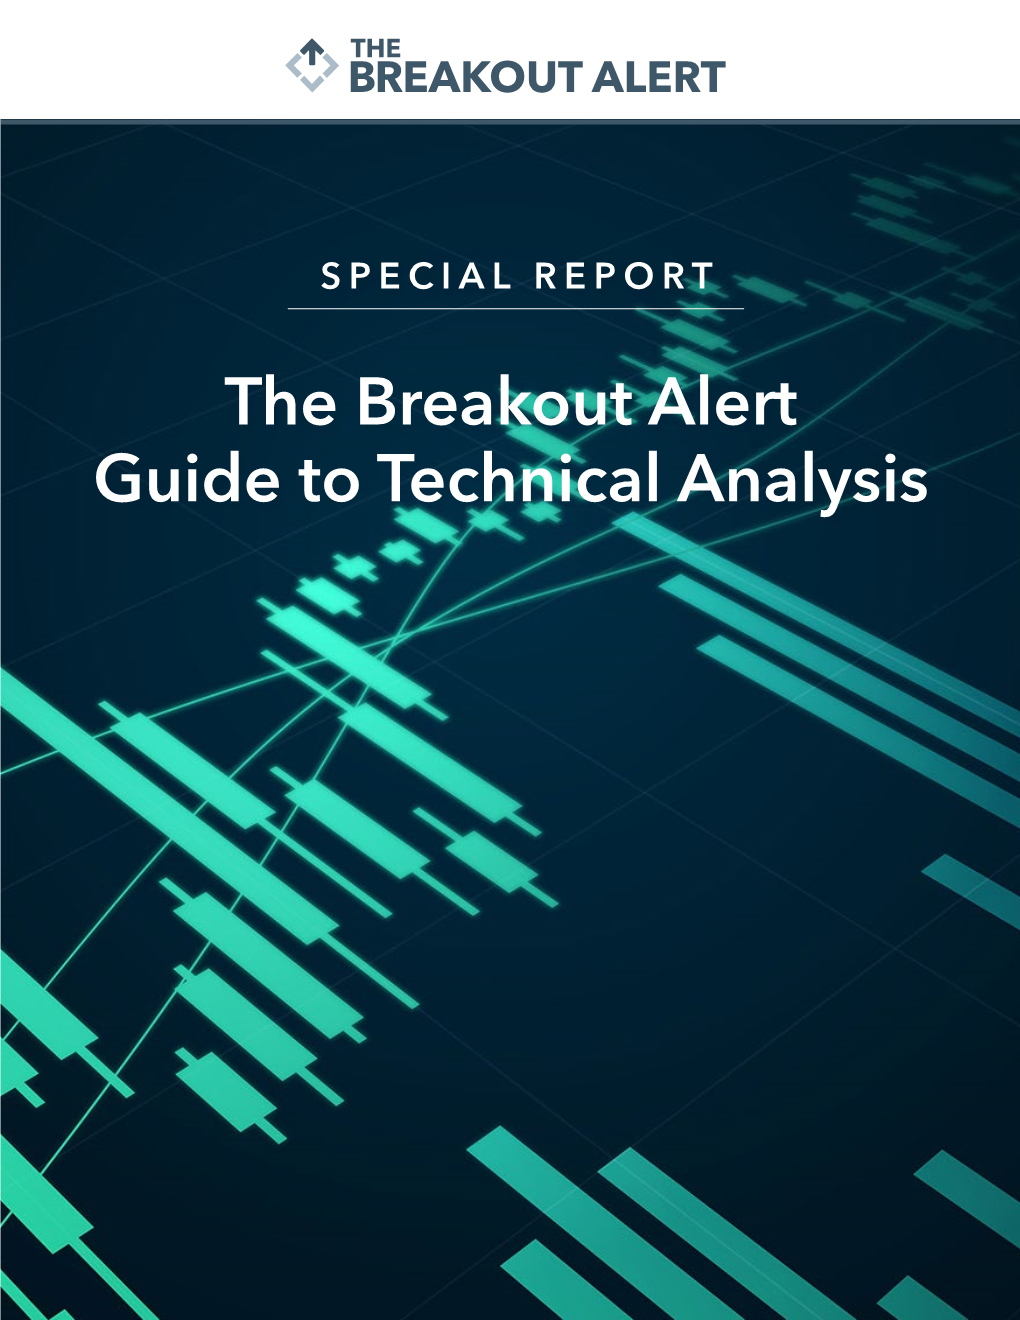 The Breakout Alert Guide to Technical Analysis the BREAKOUT ALERT